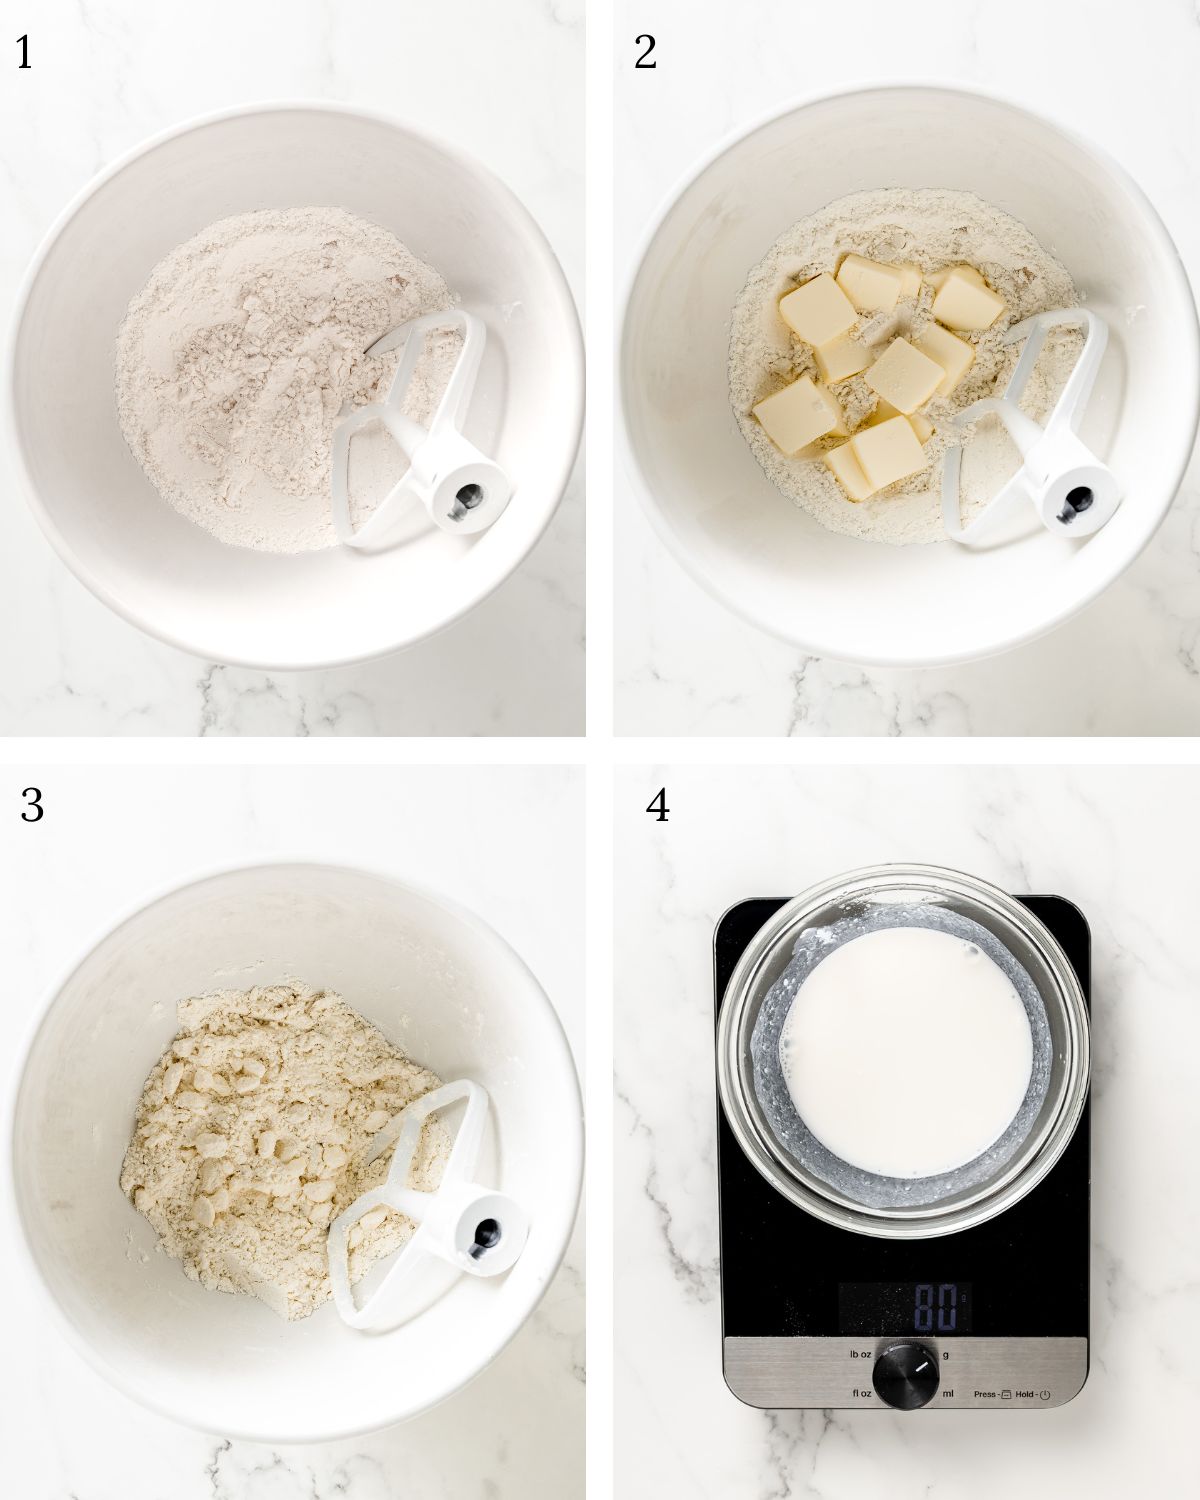 Steps making the gluten-free pie crust. A large white bowl with paddle attachment and flour. Second photo shows cubed butter added to the large white bowl with flour. Third photo shows the butter incorporated into the flour. Fourth photo shows the wet ingredients mixed together in a small bowl on a food scale.